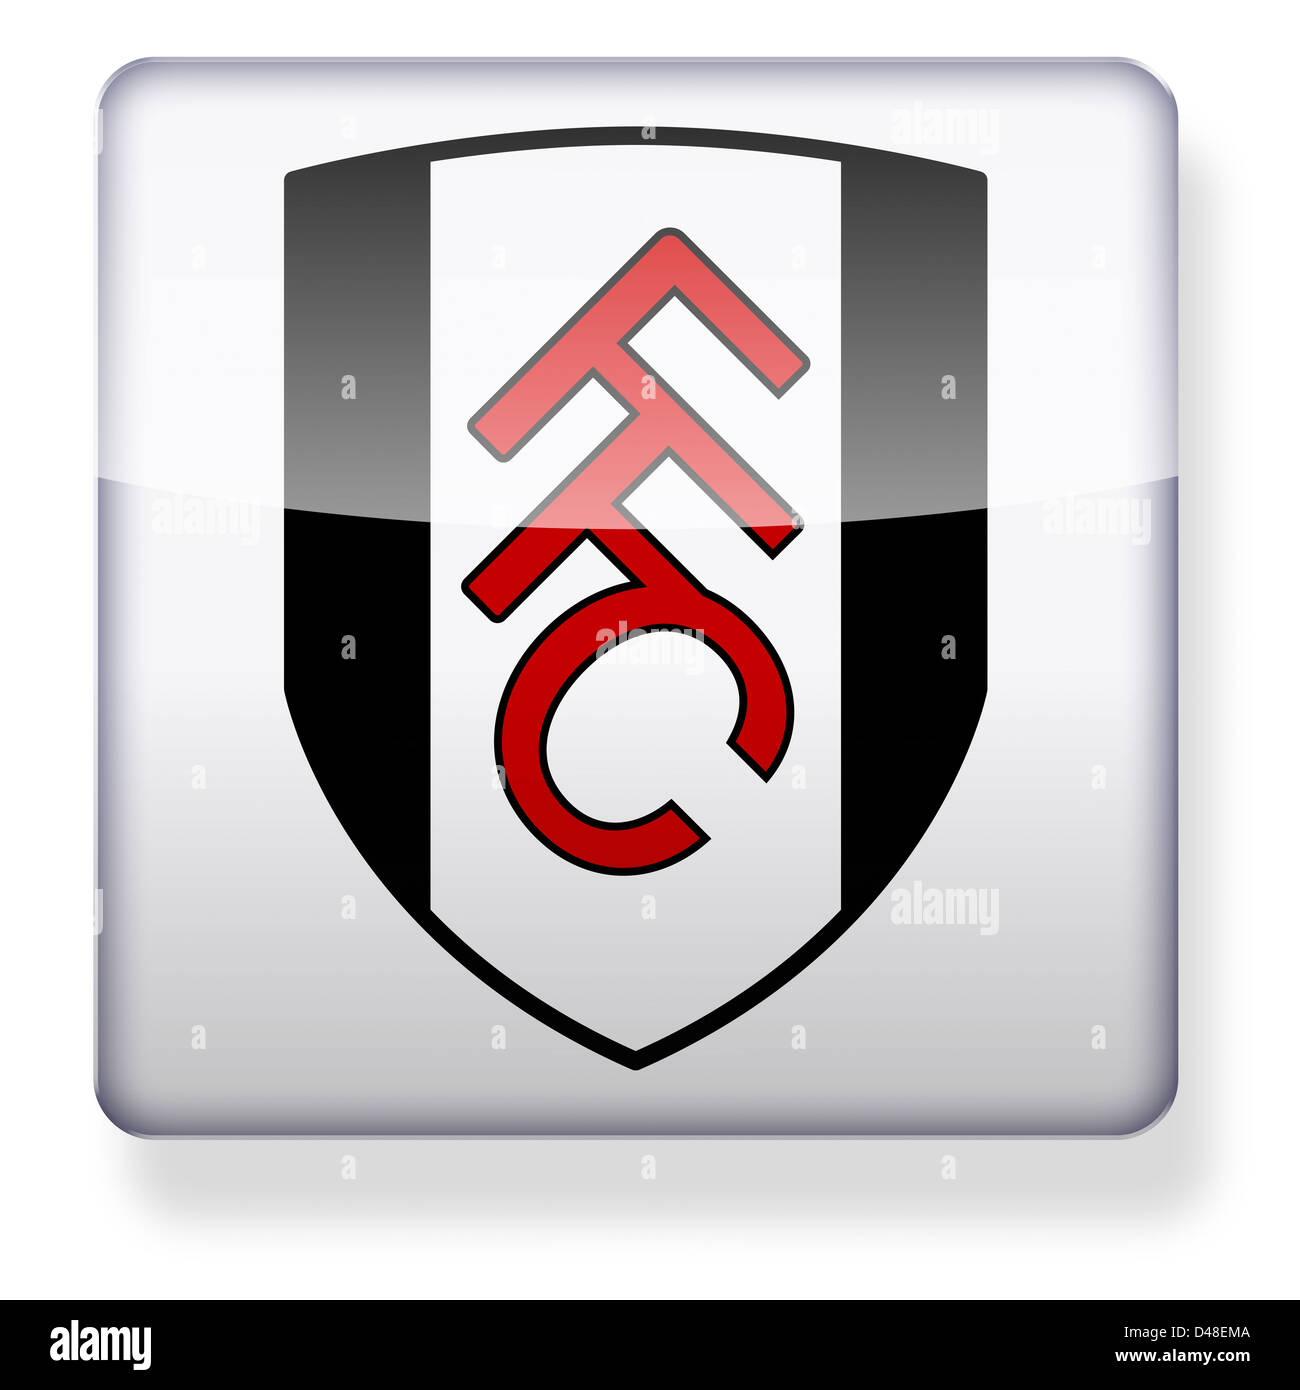 Fulham football club logo as an app icon. Clipping path included. Stock Photo